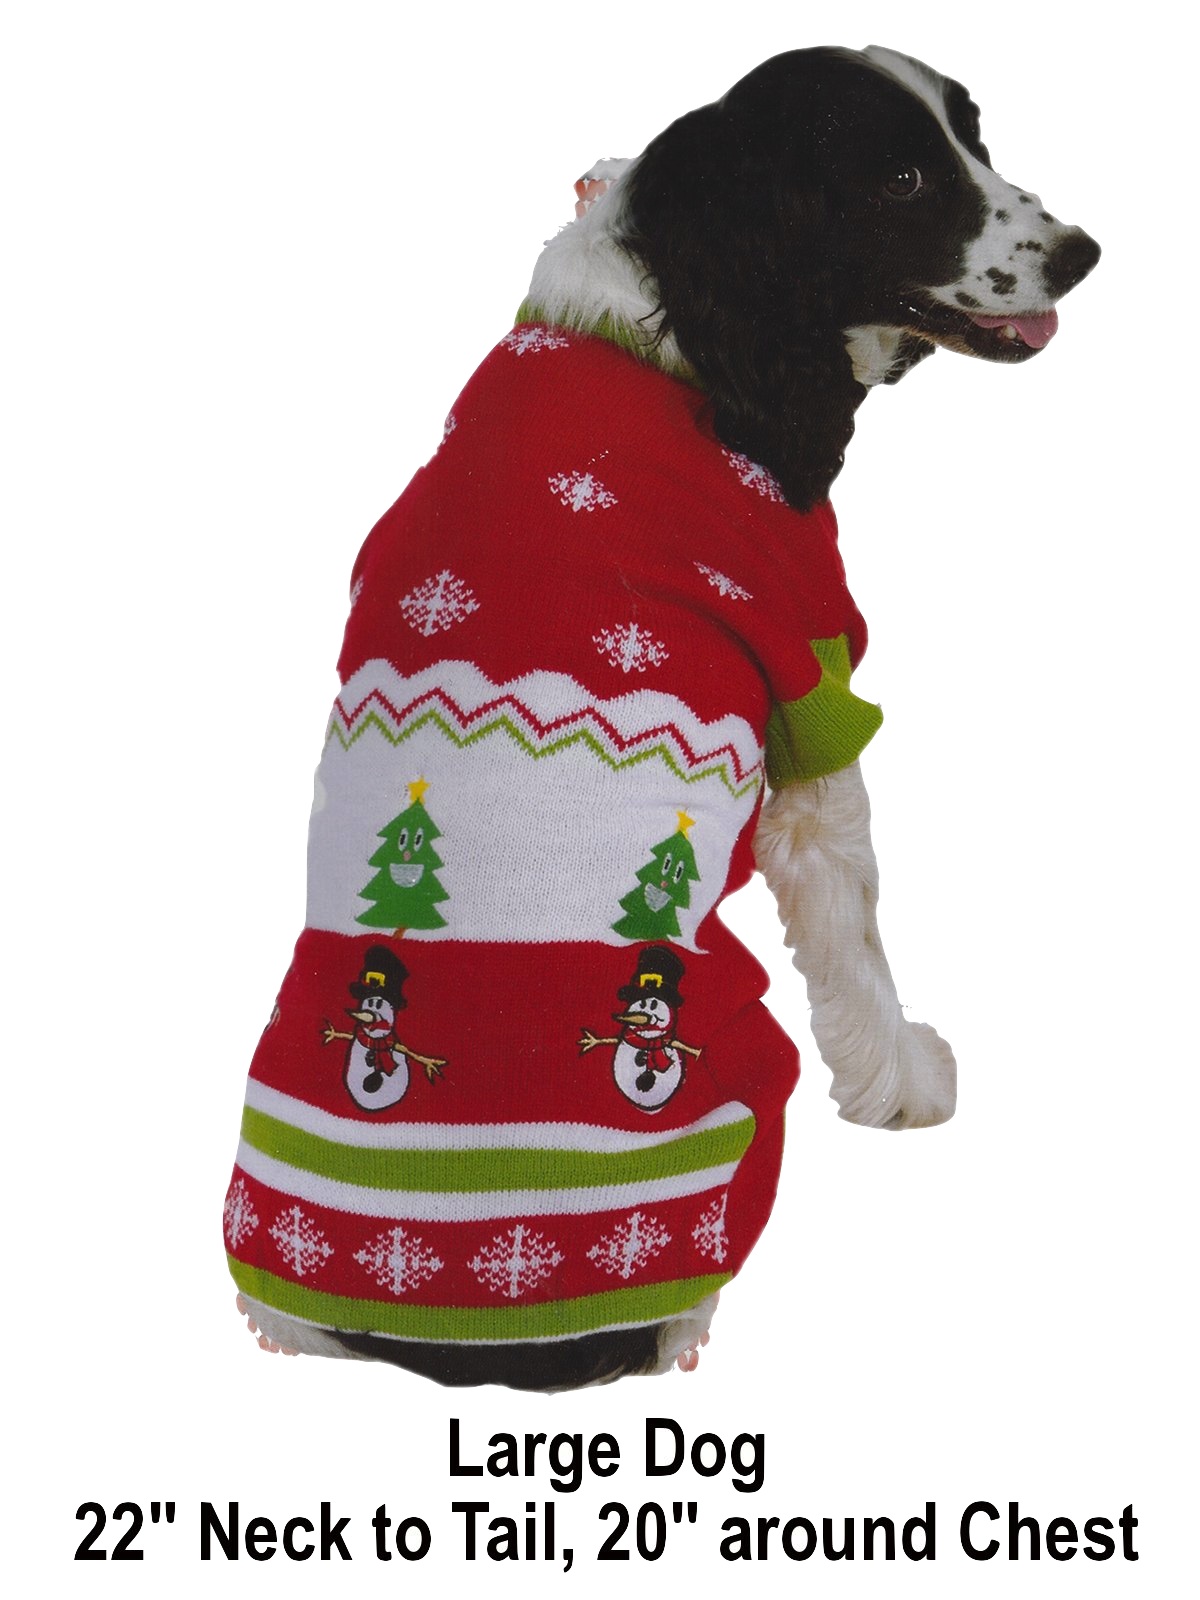 Accessories - Ugly Christmas Sweater for Dogs: 90s -Pet Boutique- Large dog red, white and green ...